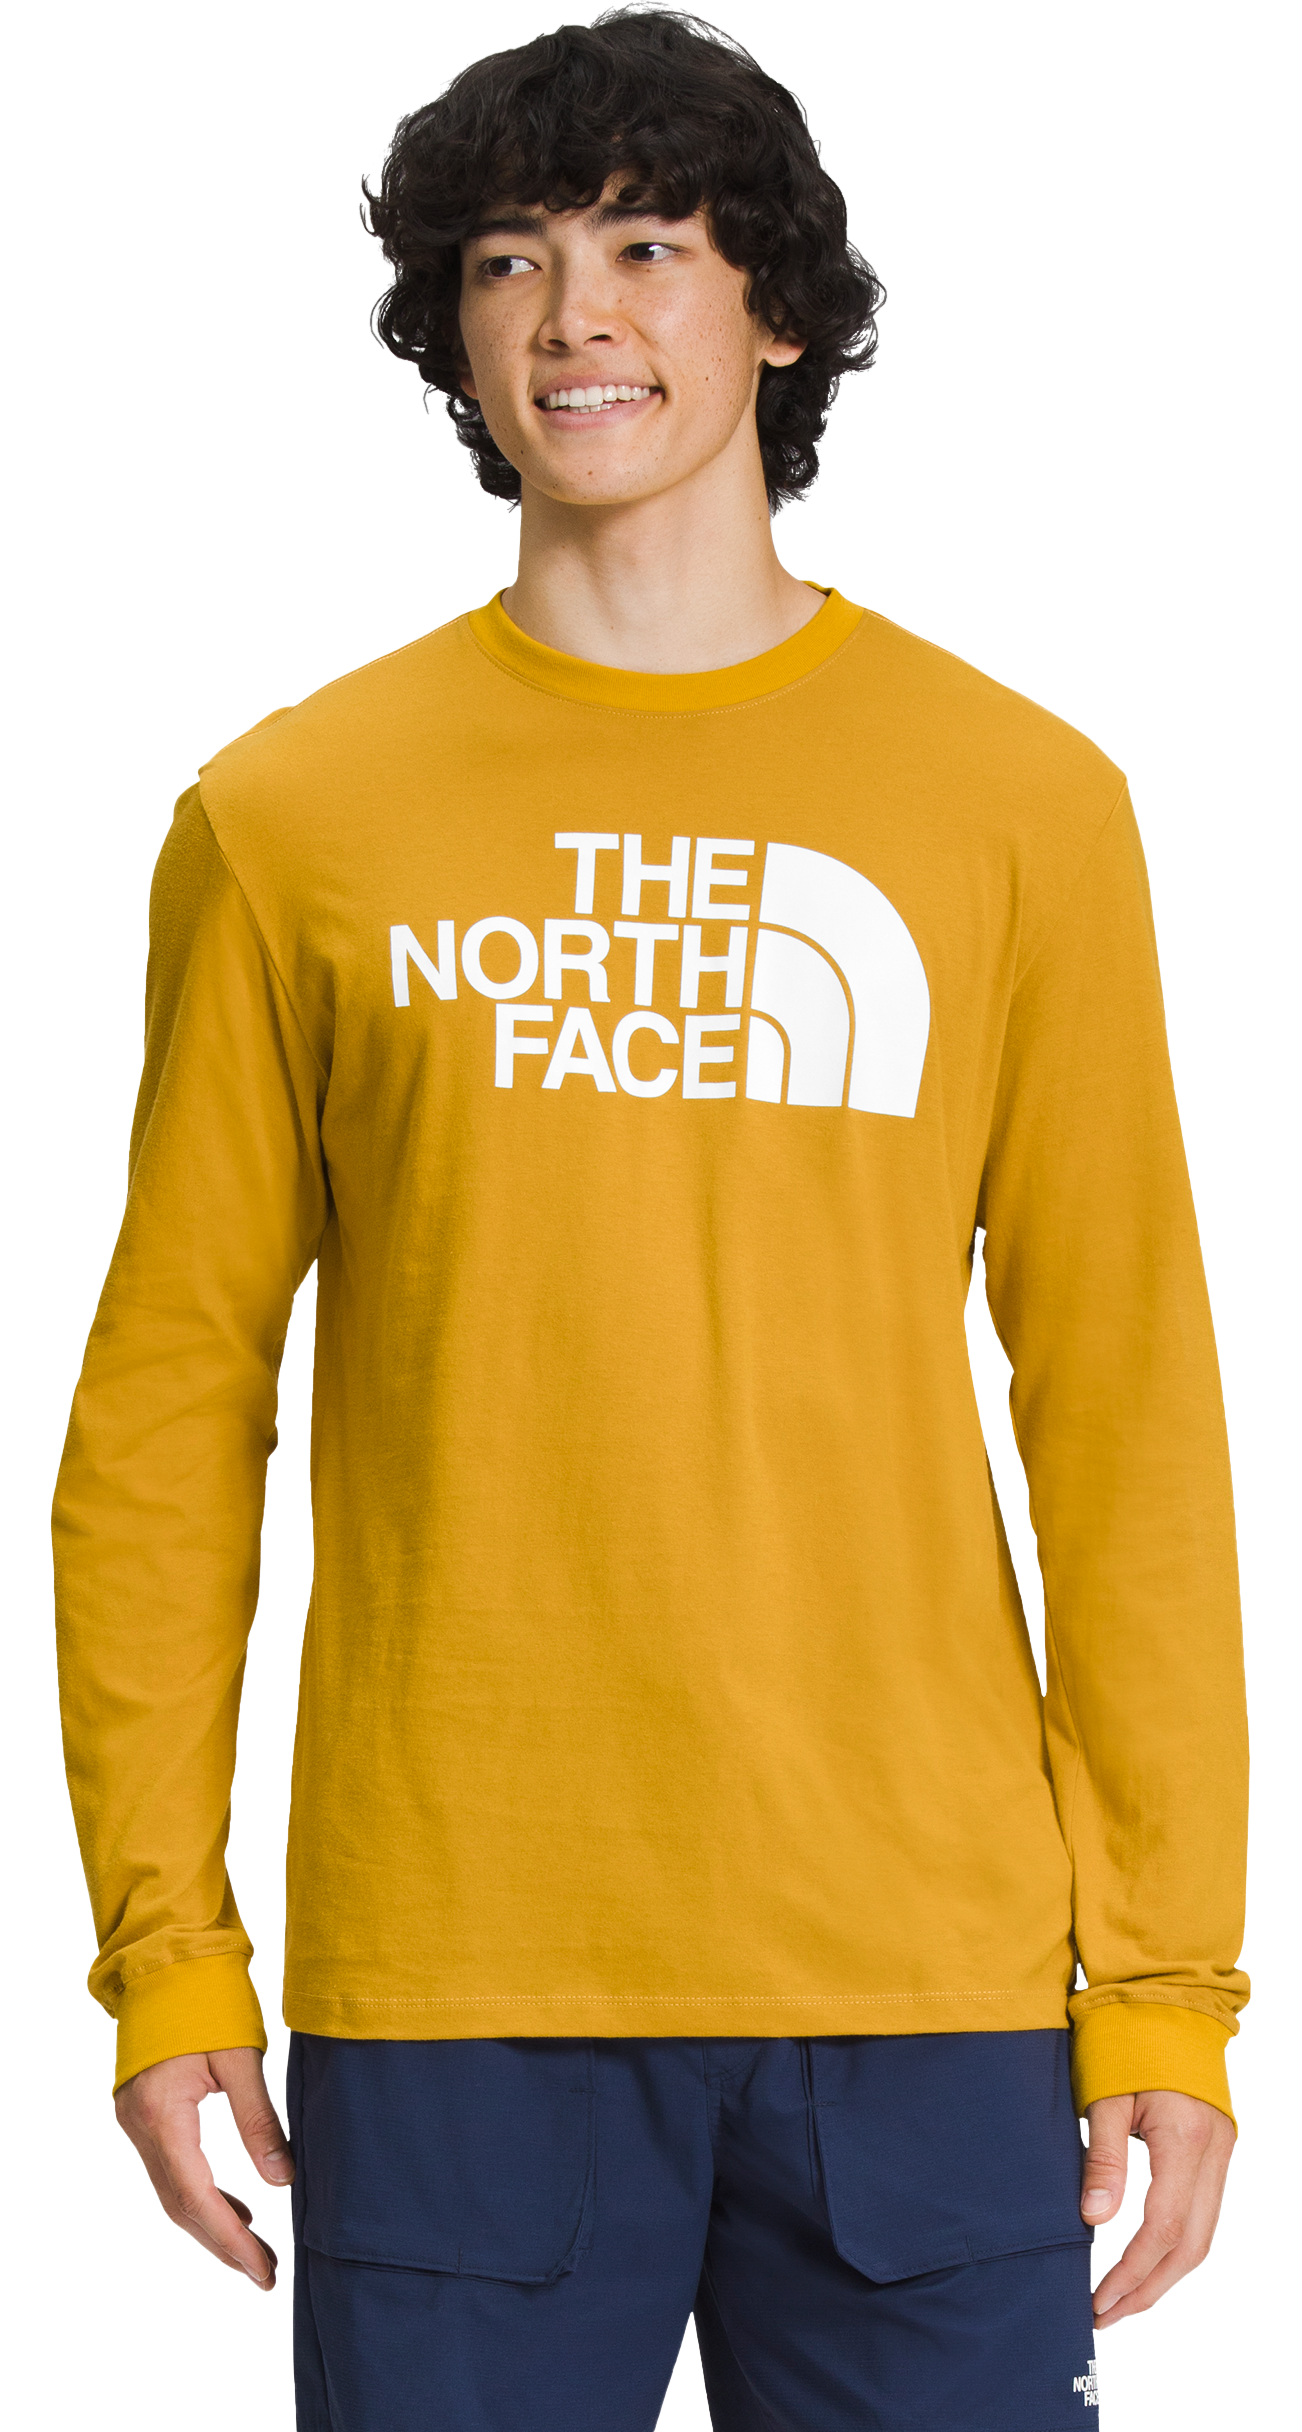 The North Face Half Dome Long-Sleeve T-Shirt for Men - Arrowwood Yellow/TNF White - XL